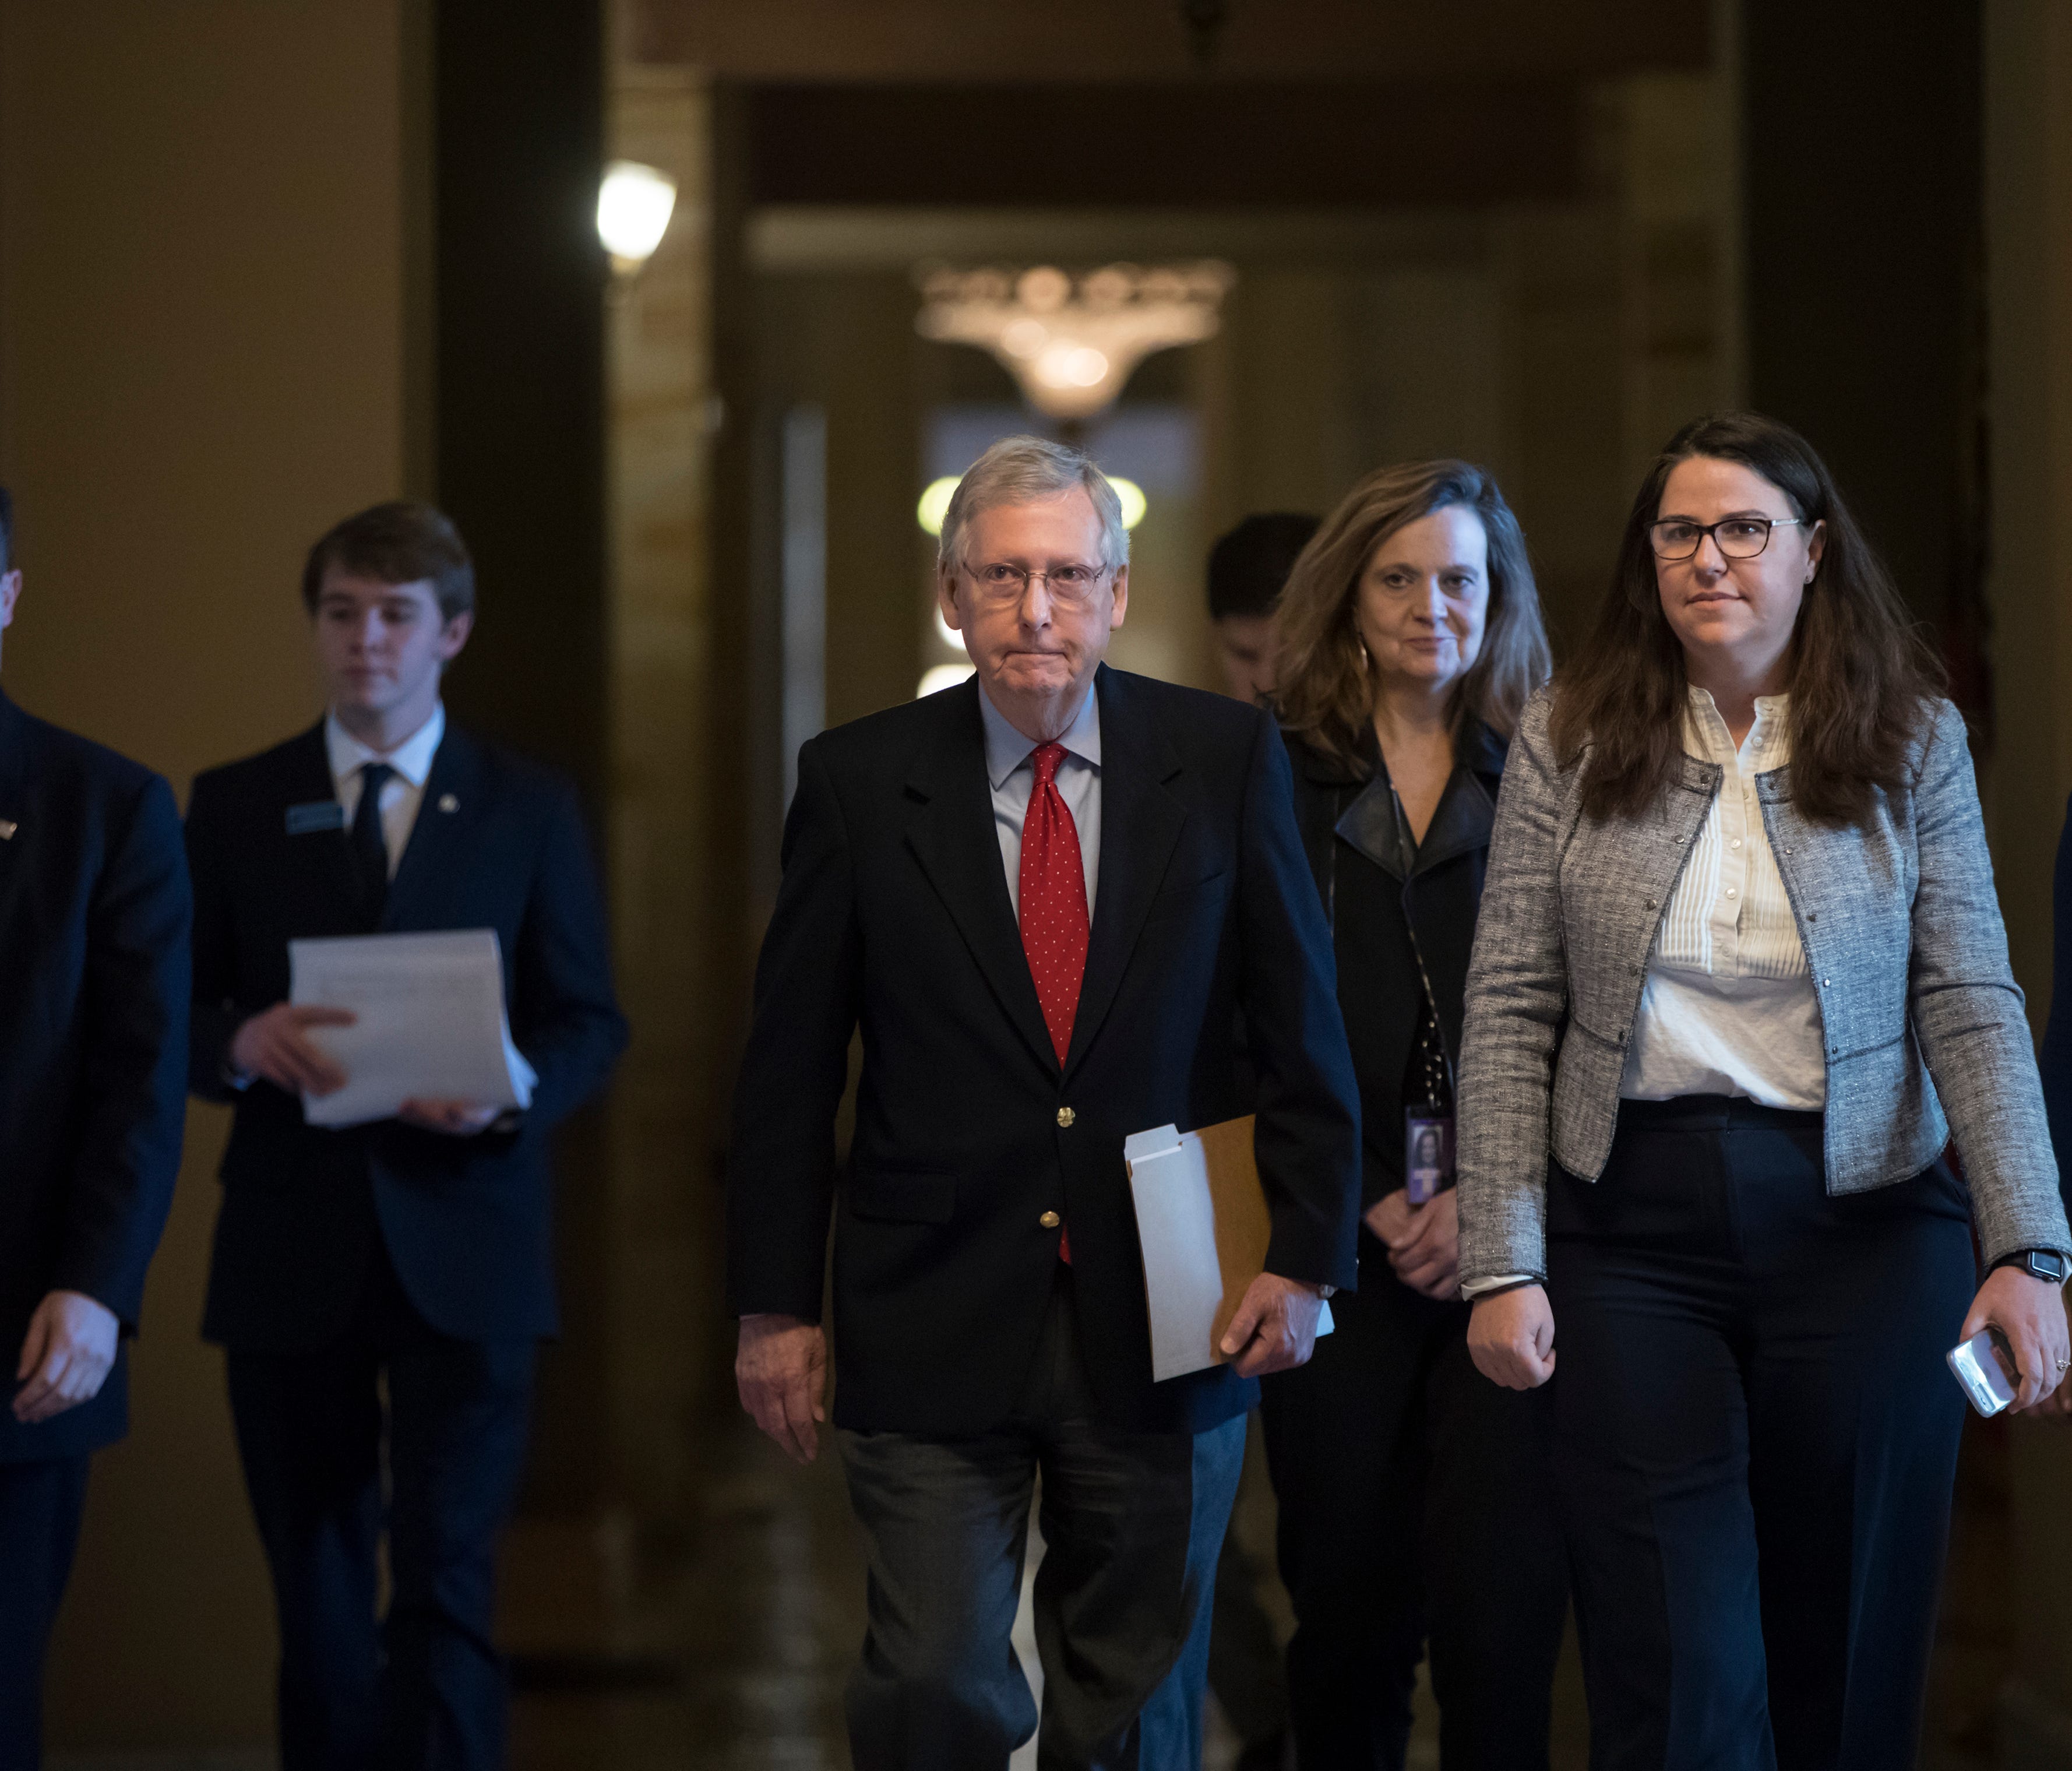 Senate Majority Leader Mitch McConnell, R-Ky., walks to the chamber on the first morning of a government shutdown Saturday, Jan. 20, 2018.